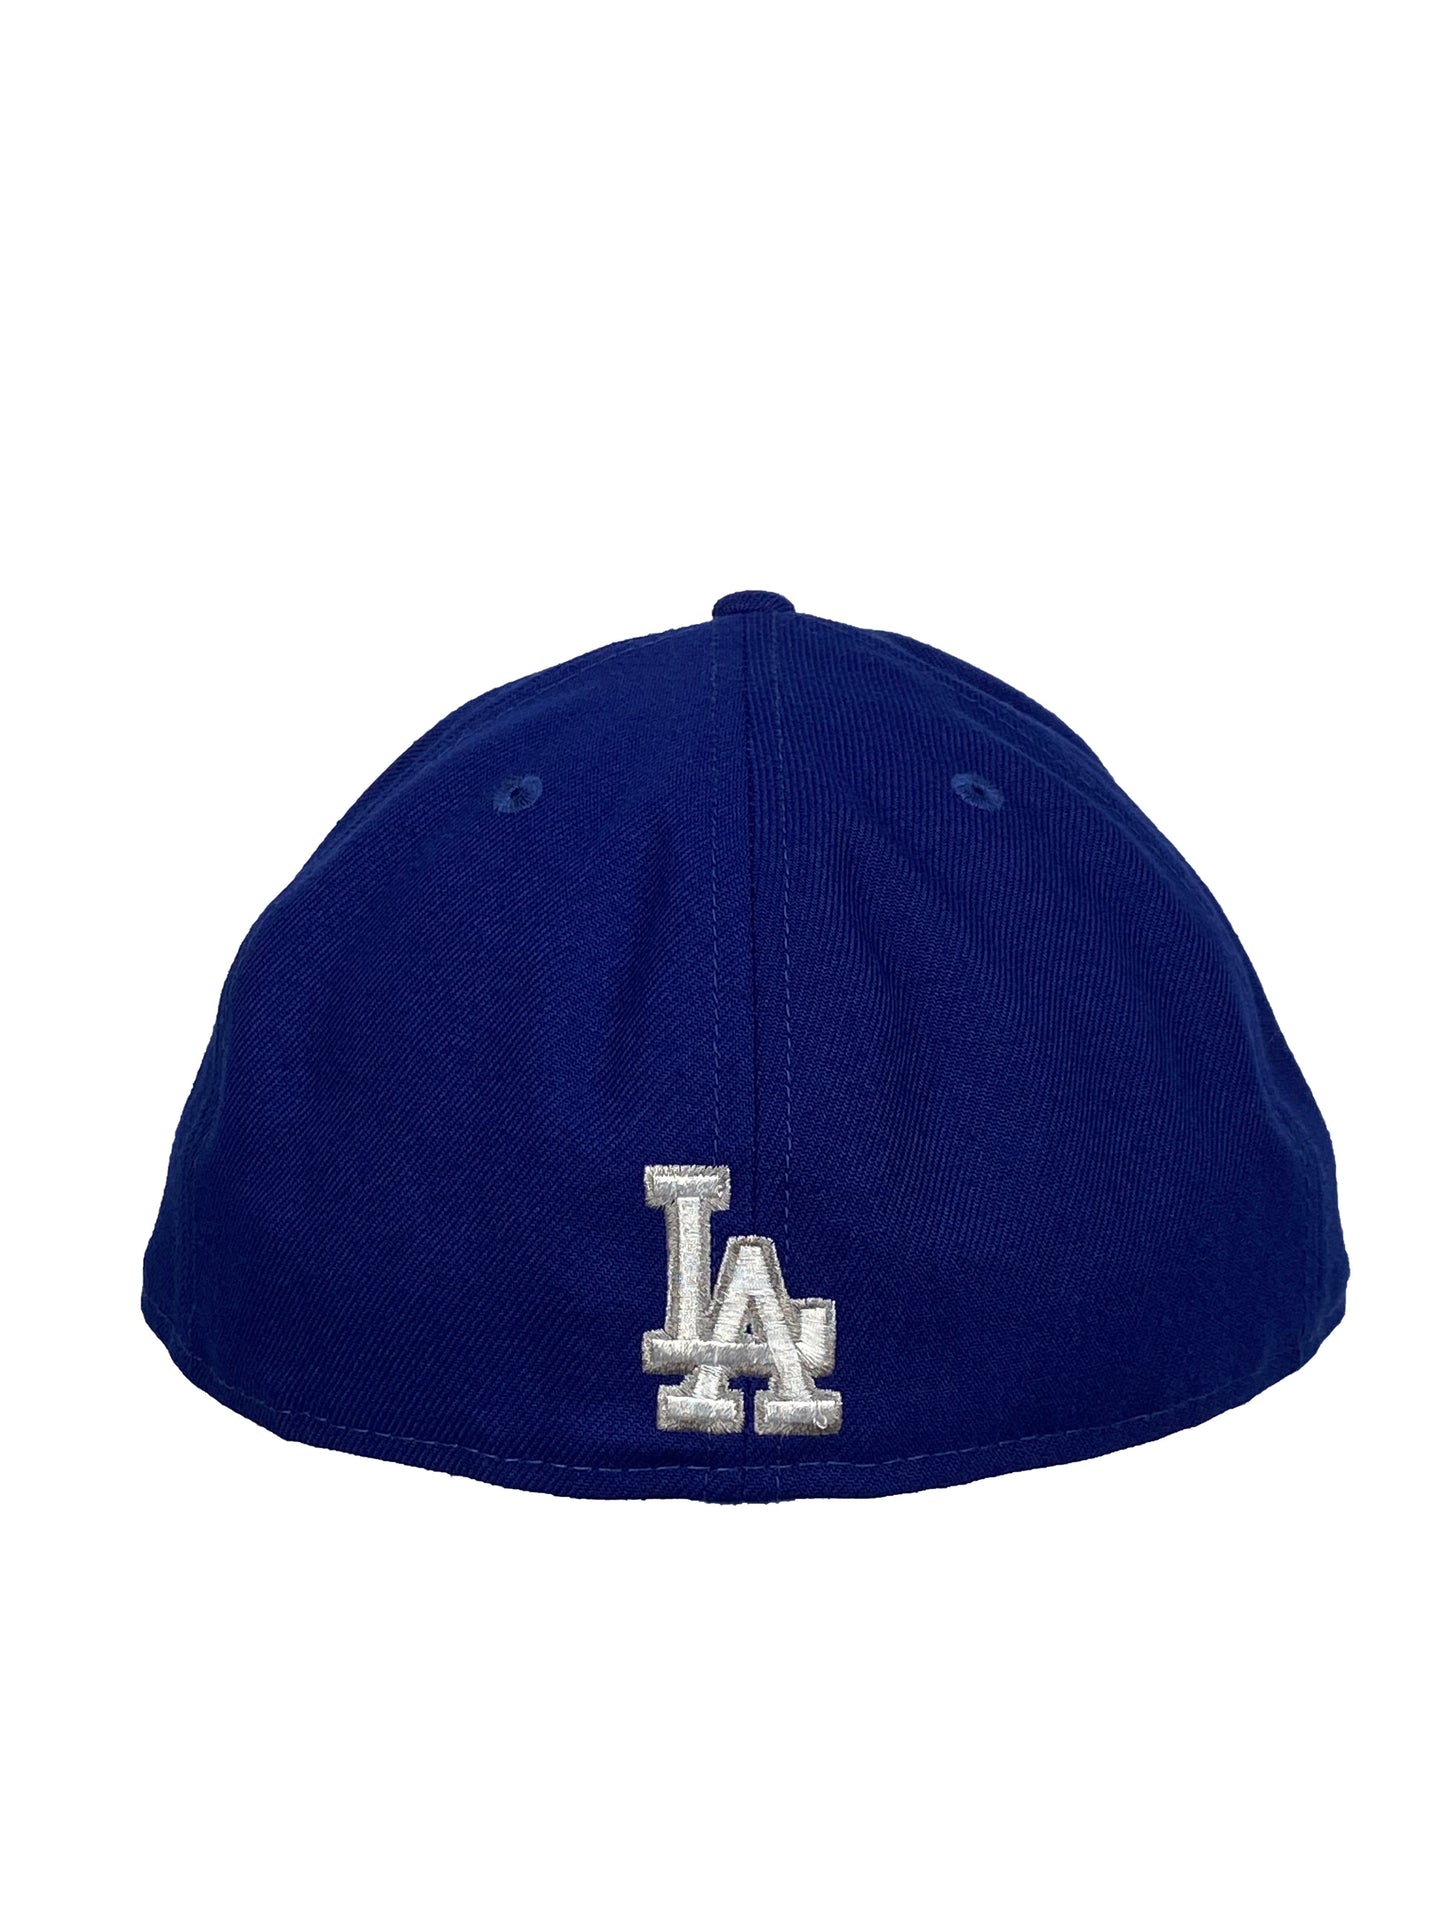 LOS ANGELES DODGERS GOLD STATE 59FIFTY